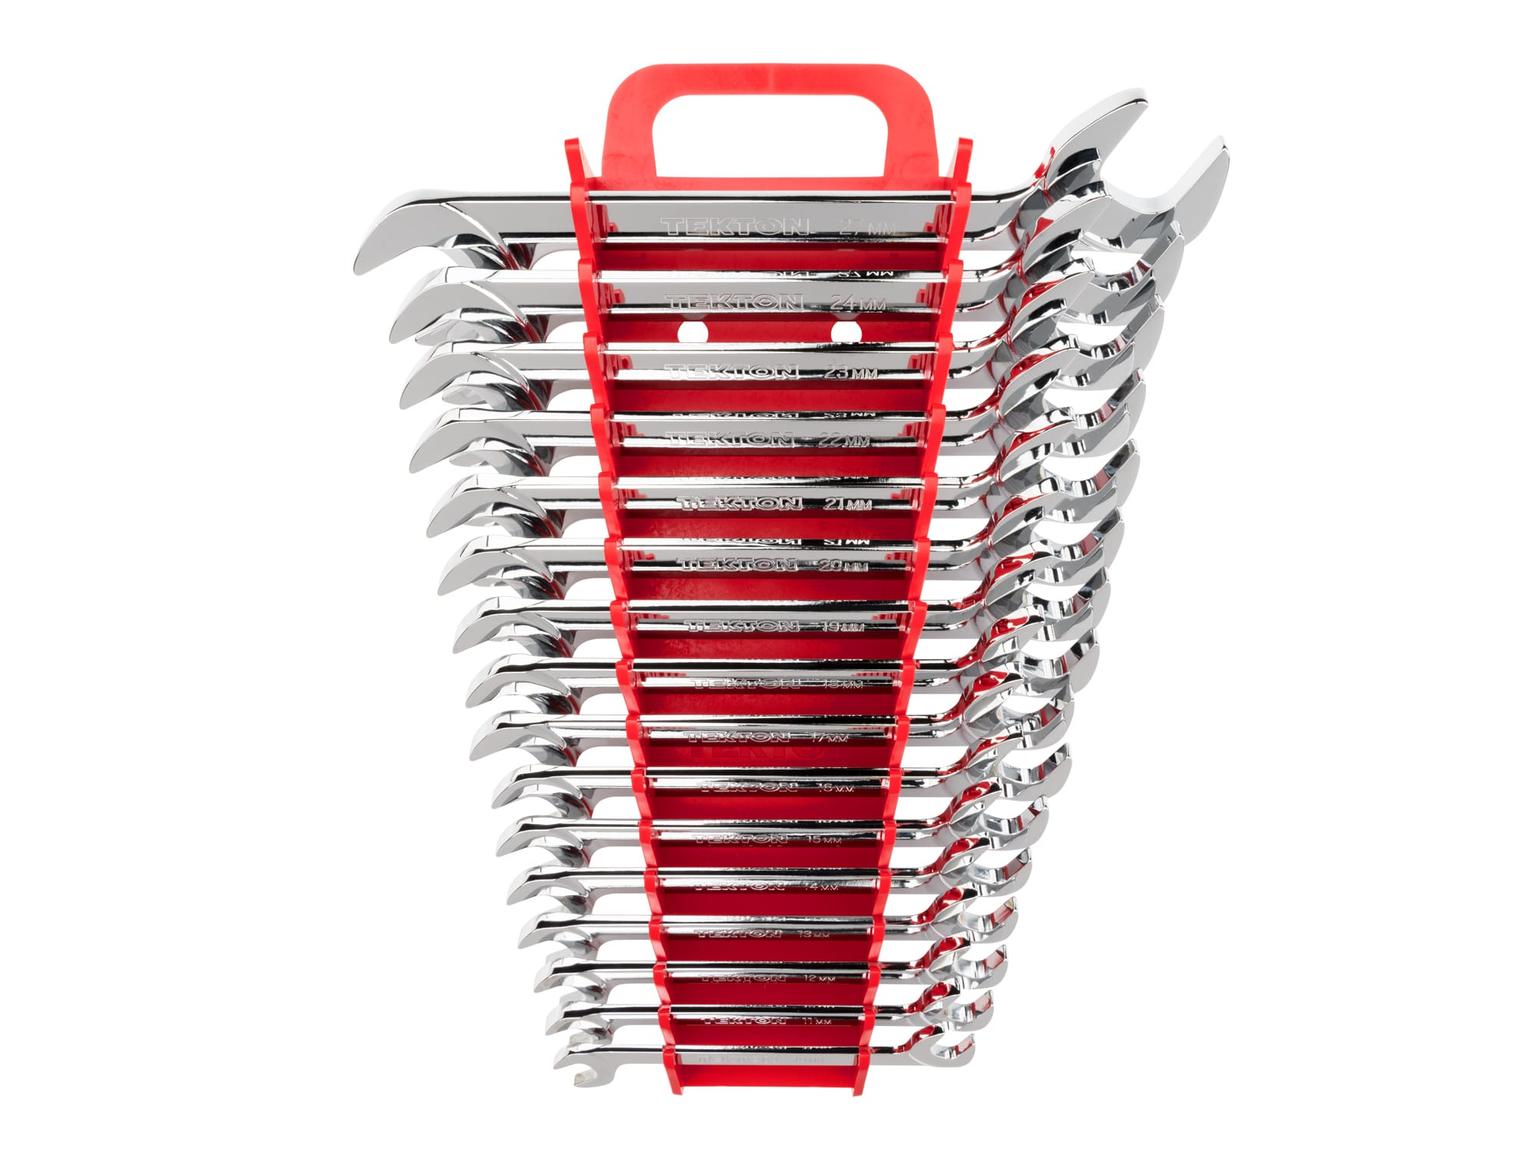 TEKTON WAE91202-T Angle Head Open End Wrench Set with Holder, 16-Piece (10 - 27 mm)